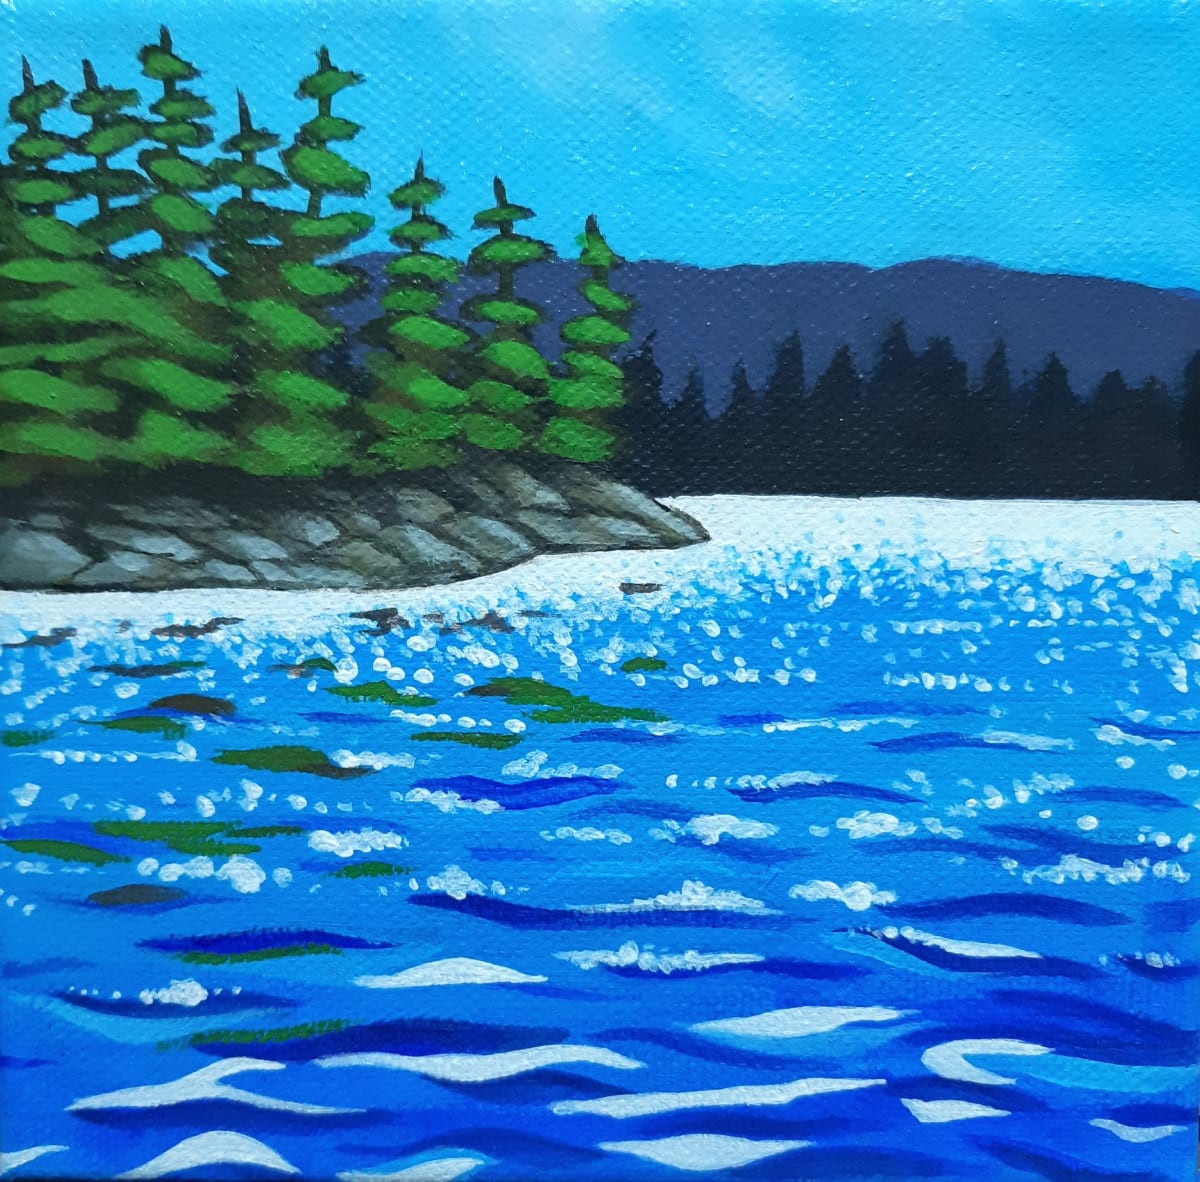 Sparkling Water by Jane Thuss  Image: White sparkles dance on the surface of the blue lake. The pines on the rocky shore are reflected in the waves.